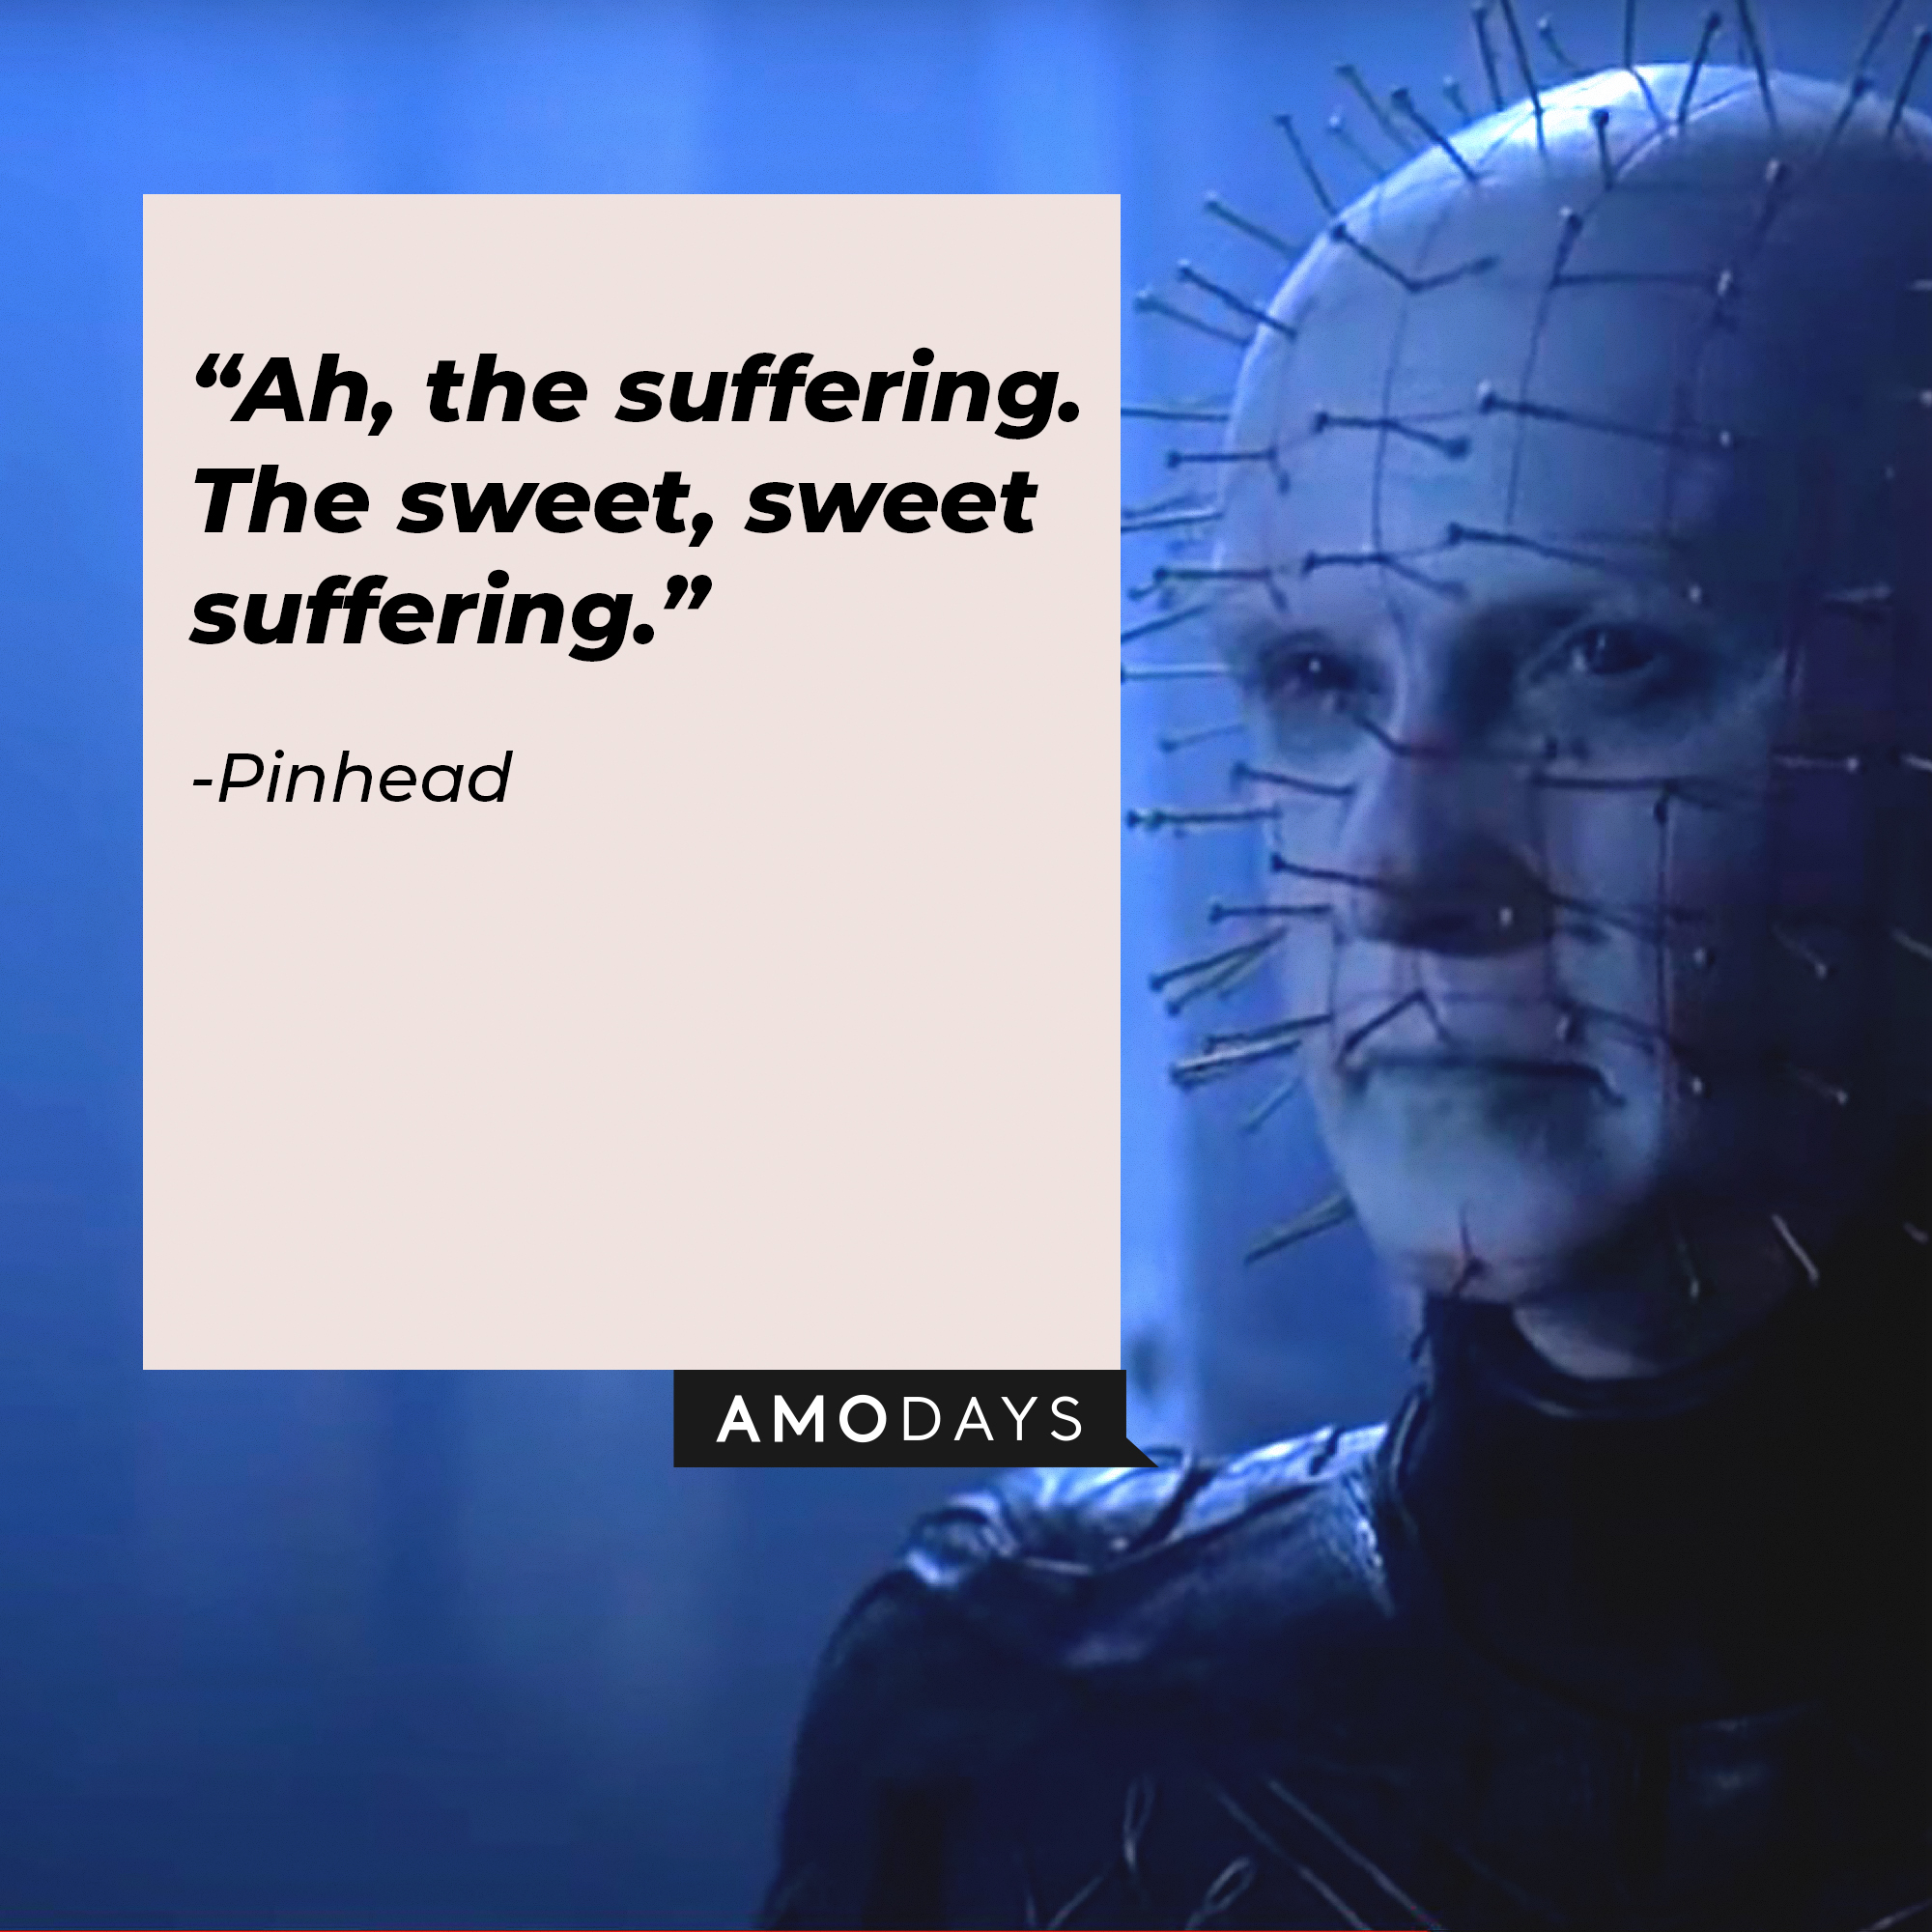 A picture of Pinhead from “Hellraiser” with a quote by him that reads, “Ah, the suffering. The sweet, sweet suffering.” | Image: facebook.com/HellraiserMovies